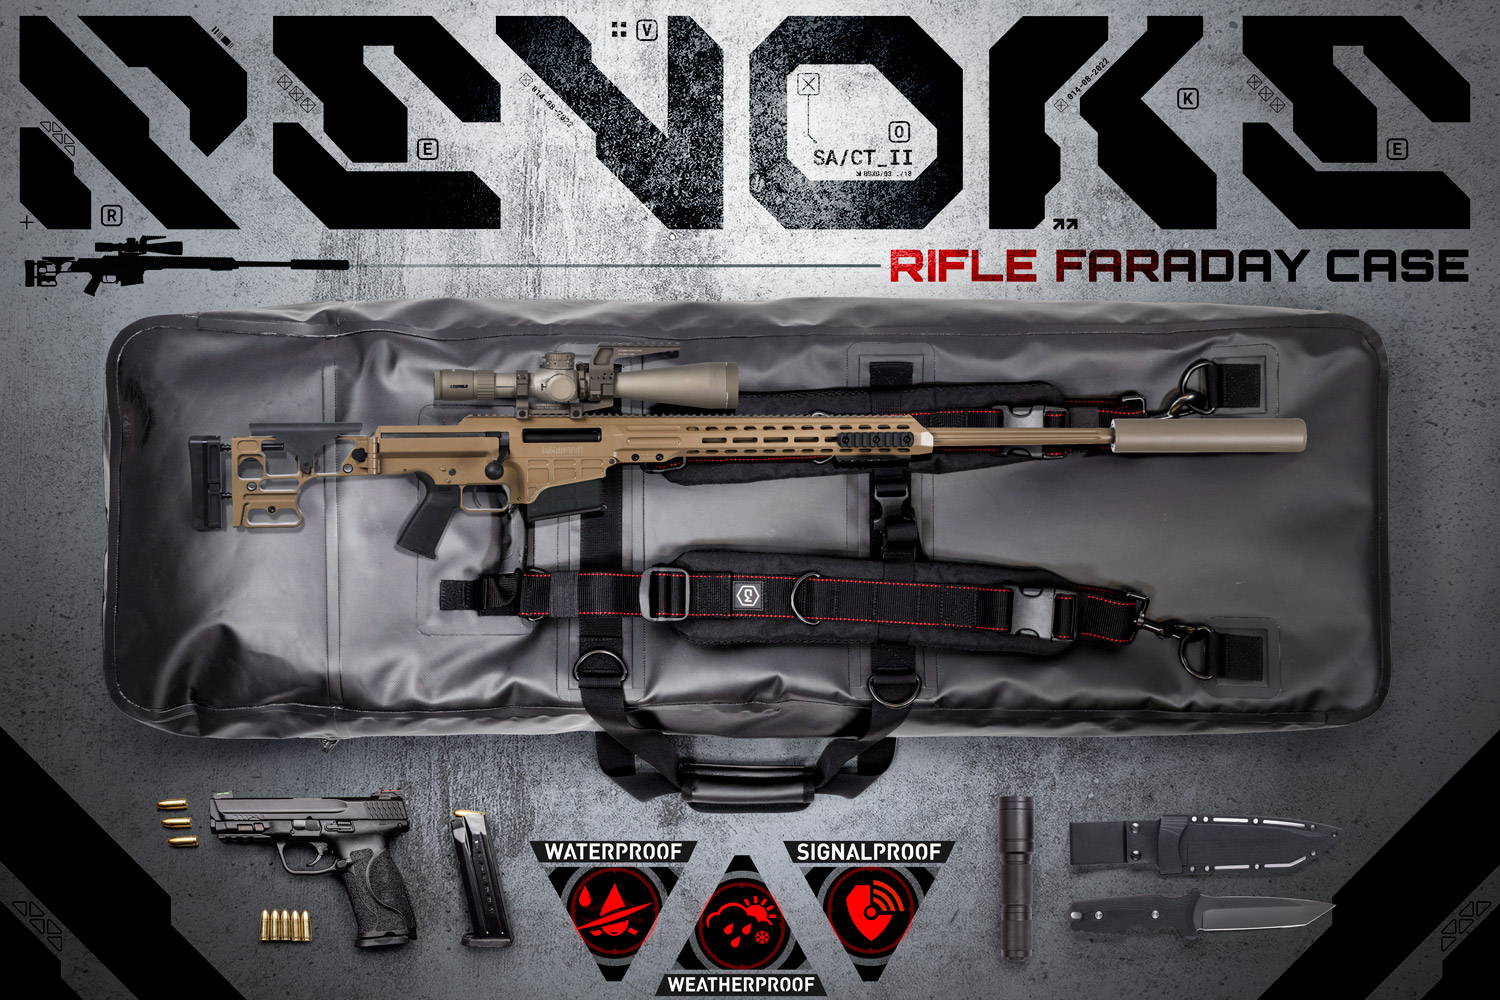 mission darkness dry shield revoke rifle faraday case offers protection against electromagnetic threats